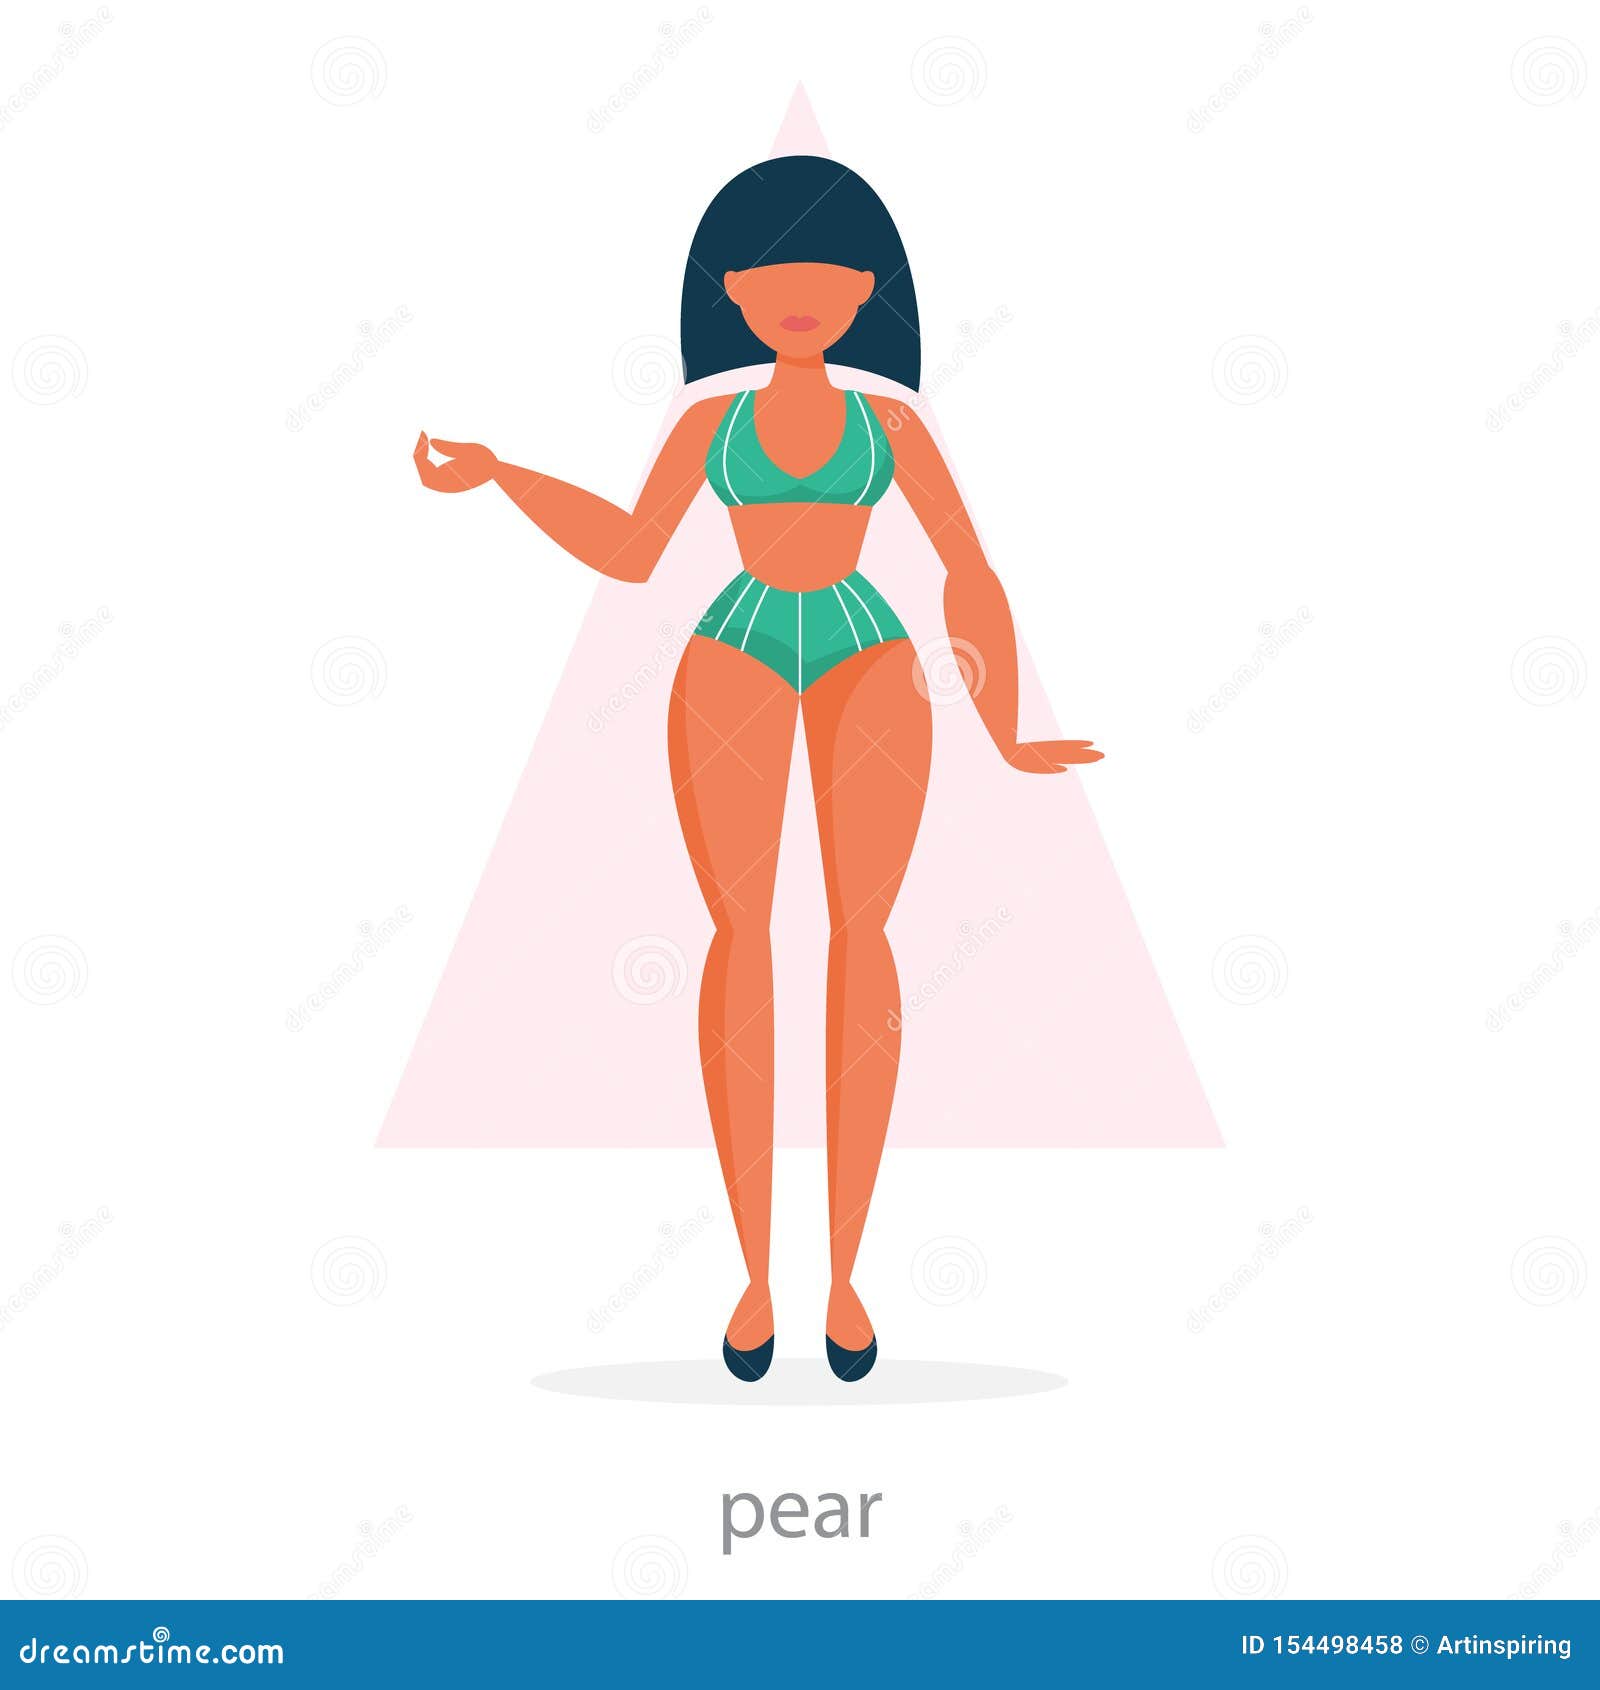 https://thumbs.dreamstime.com/z/pear-body-shape-woman-underwear-pear-body-shape-woman-underwear-female-figure-physique-human-body-isolated-vector-154498458.jpg